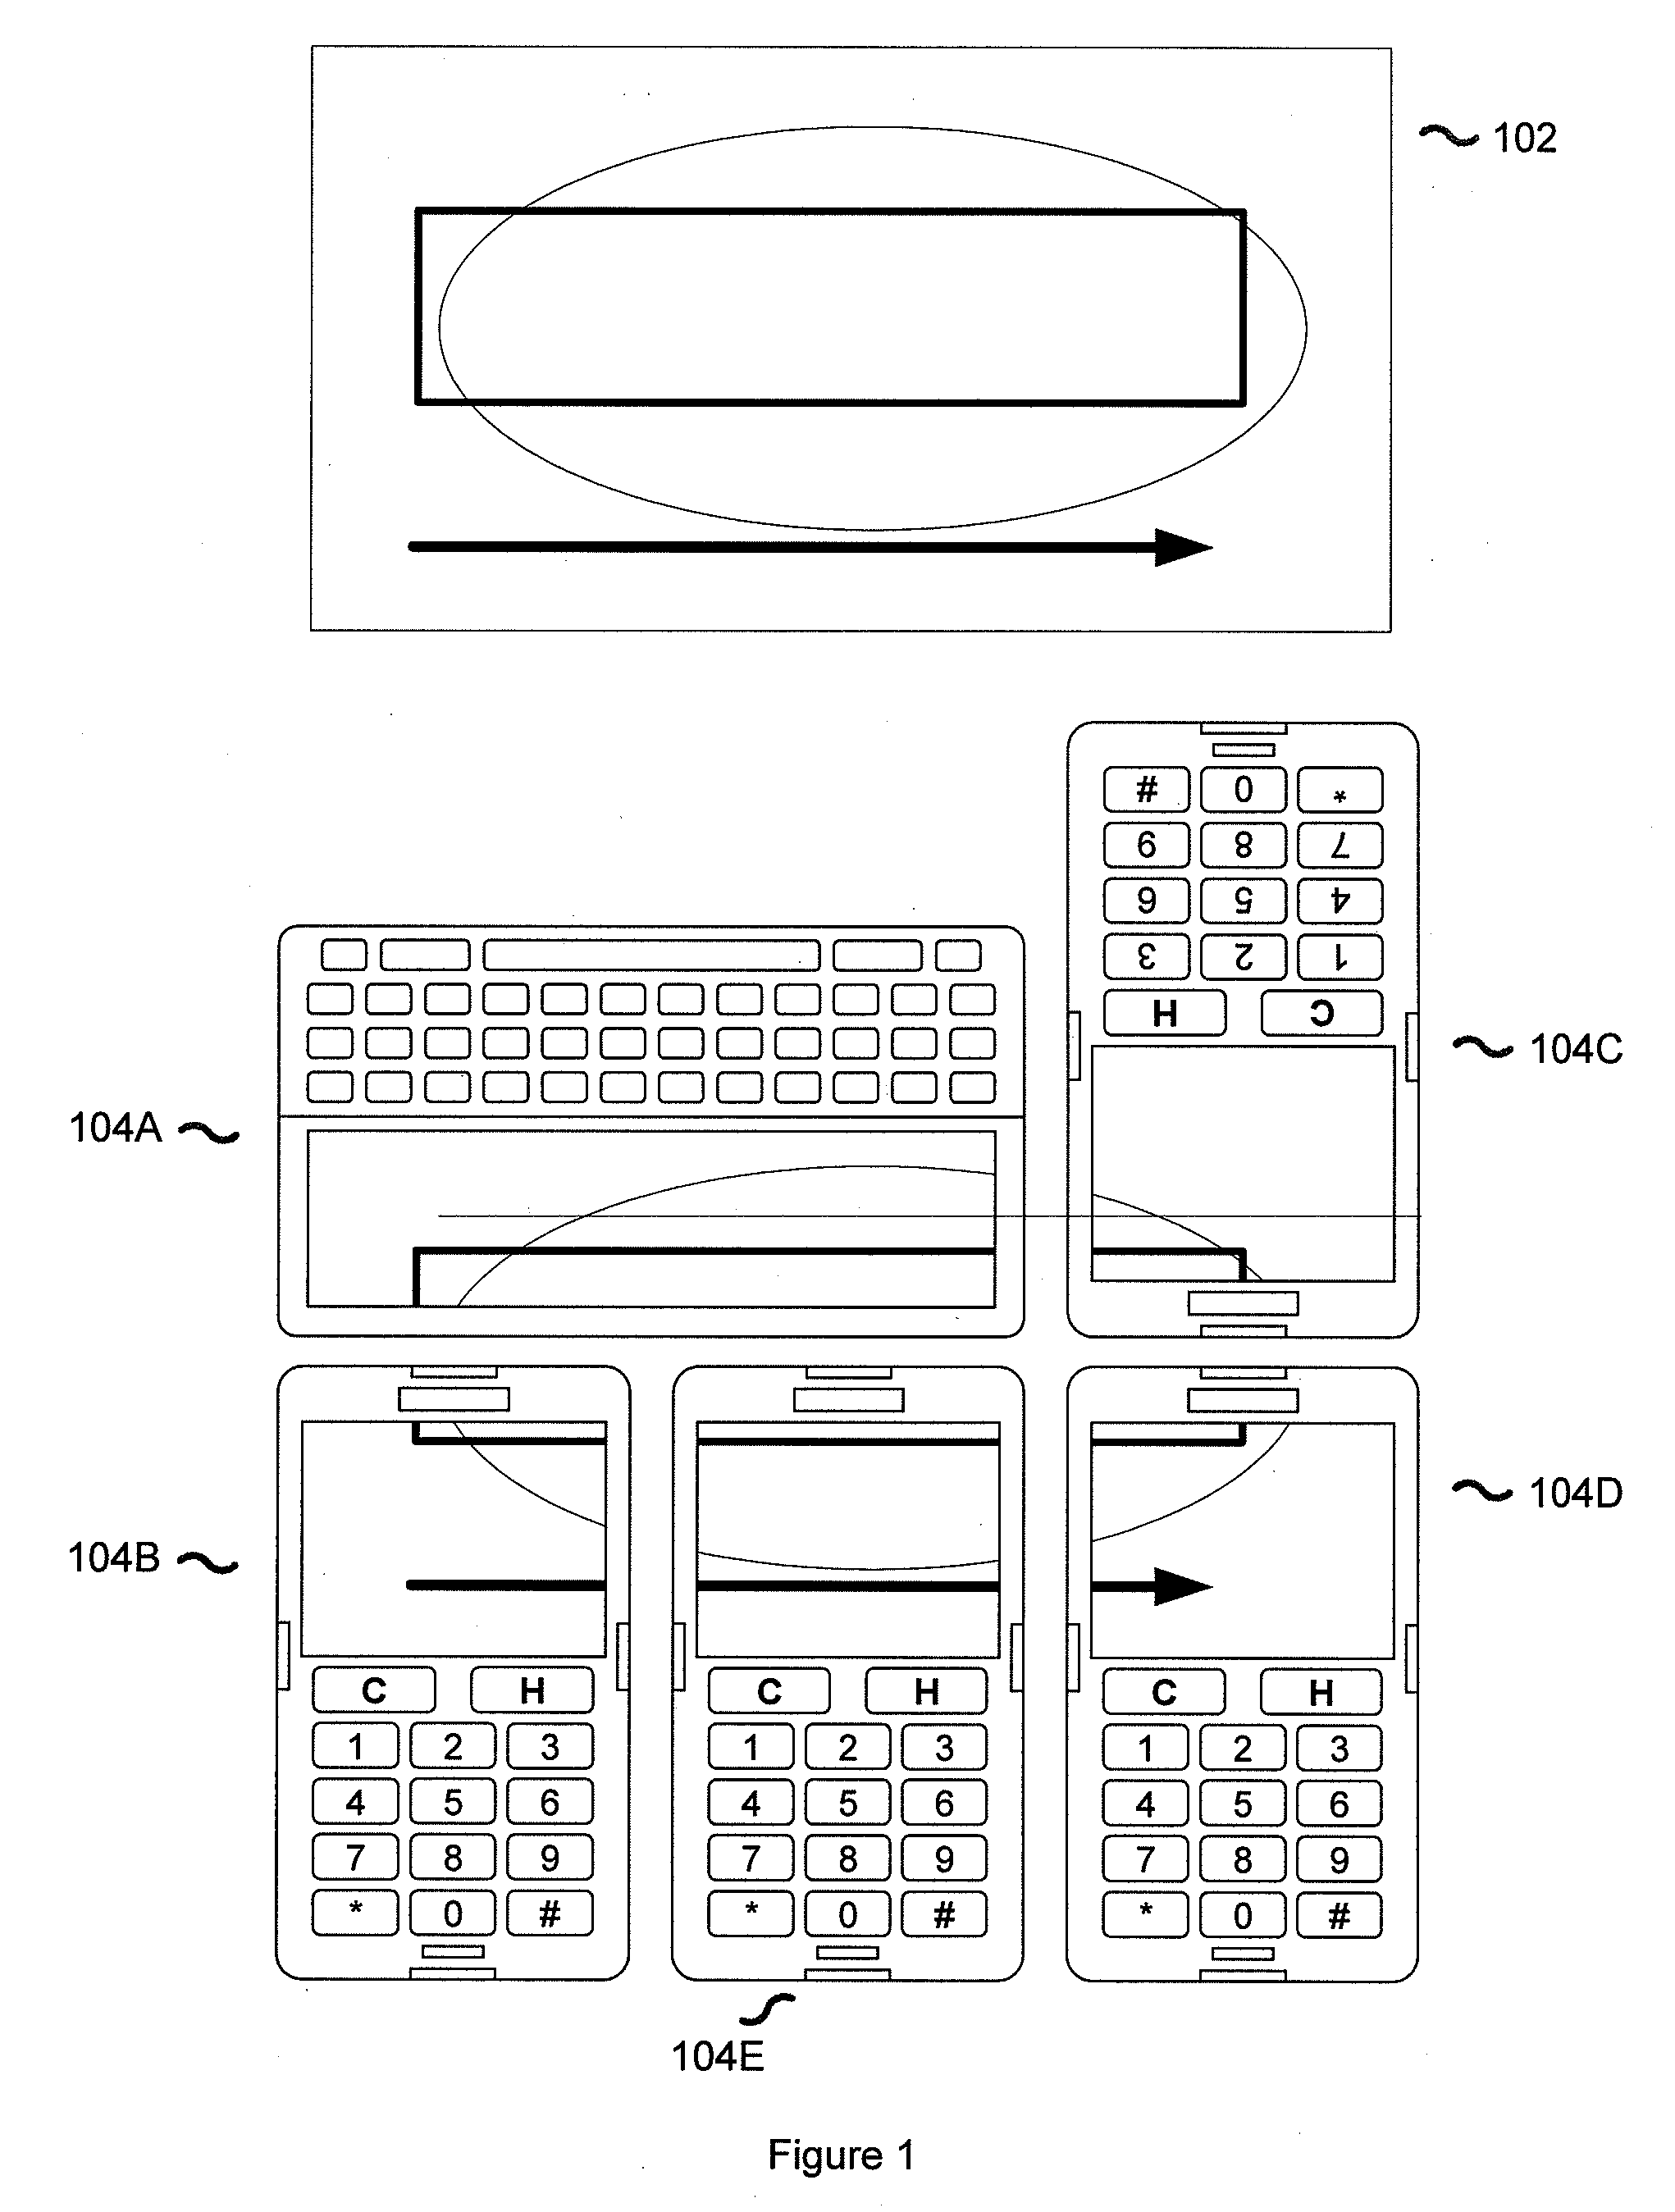 Method and System for Creation and Control of Virtual Rendering Devices